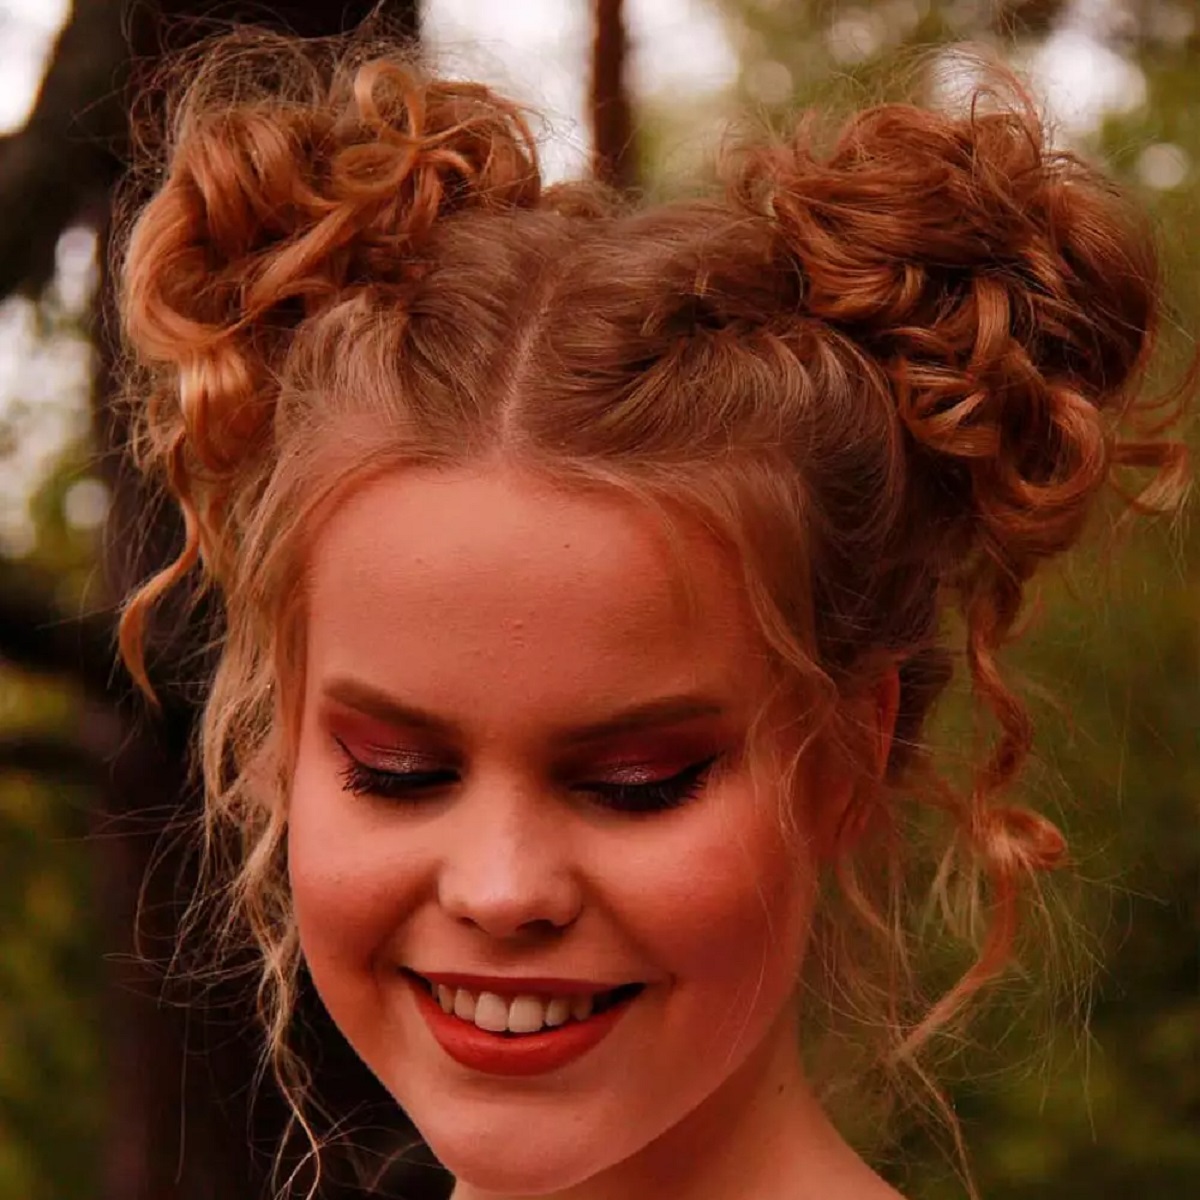 Space Buns With Glam Waves